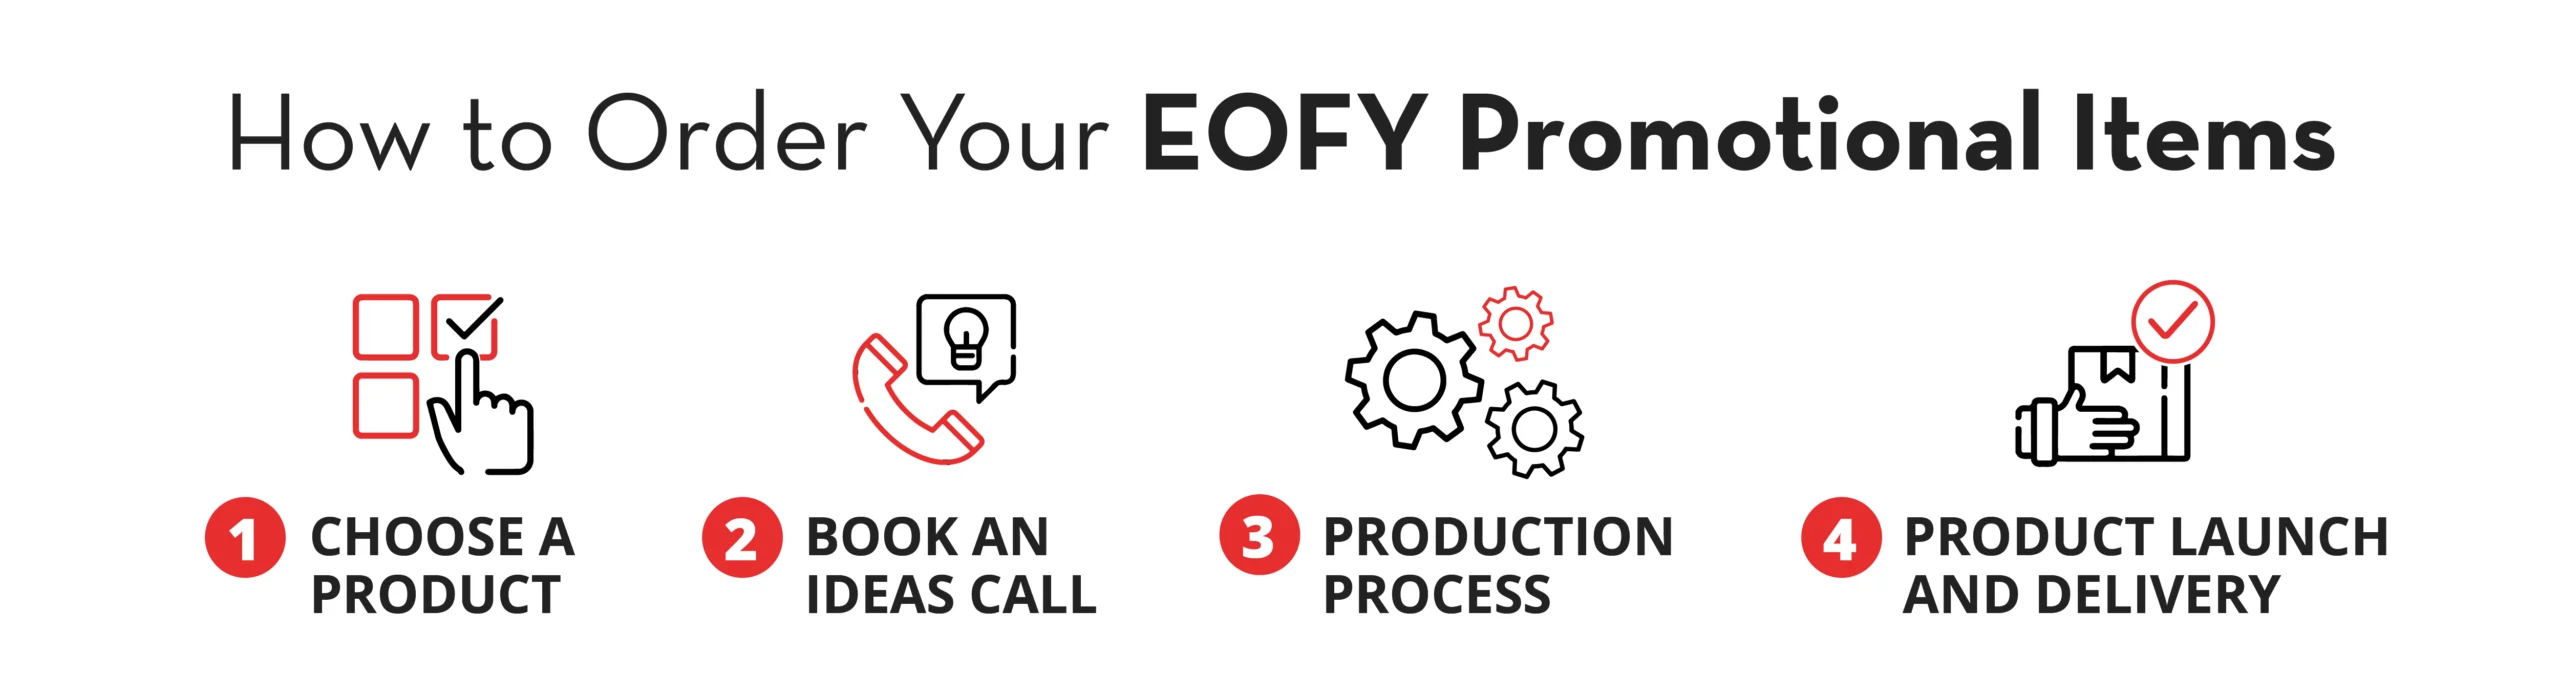 How to order your EOFY Promotional items